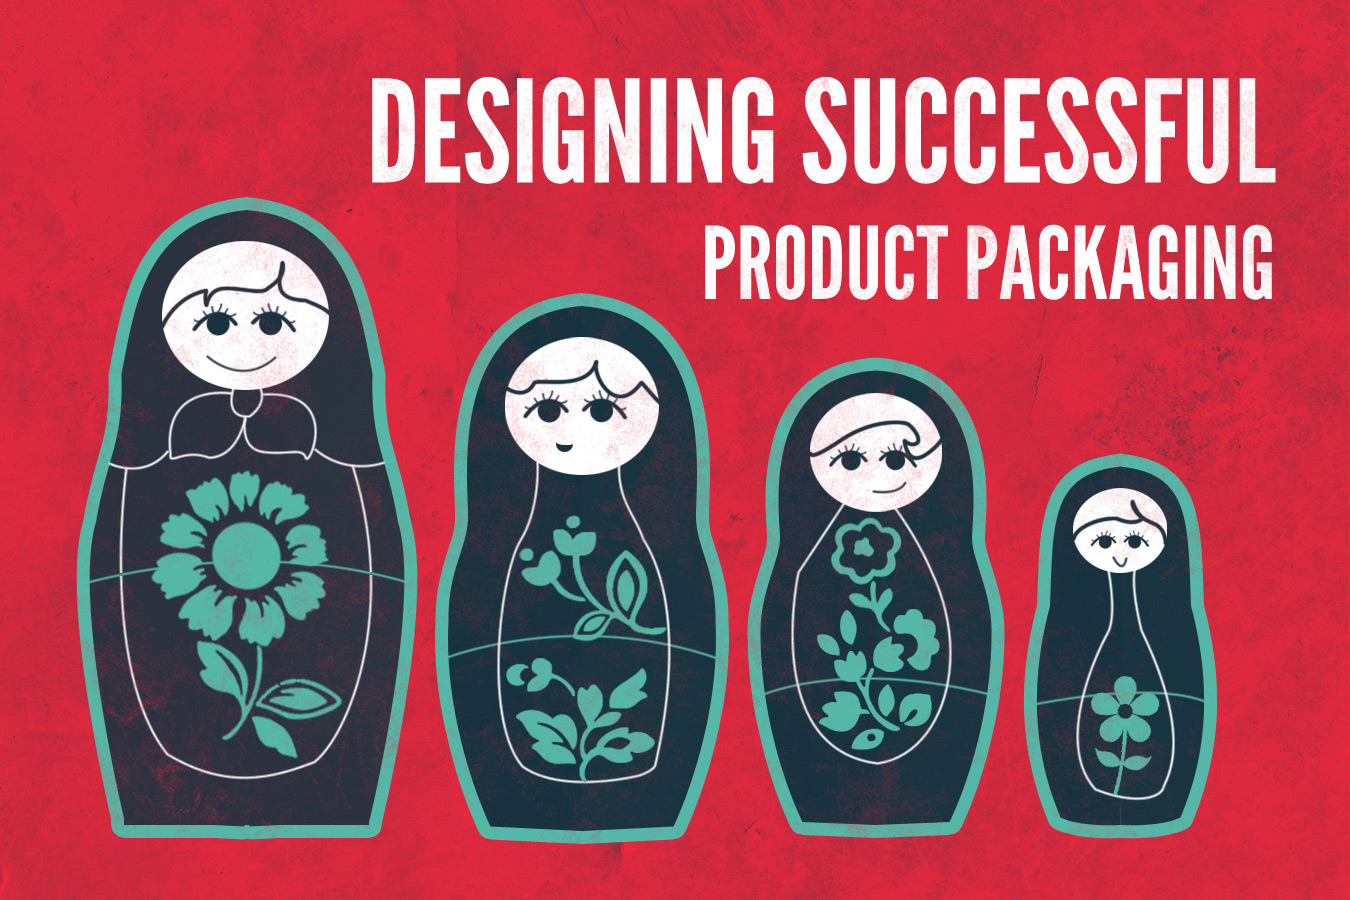 Designing Successful Product Packaging